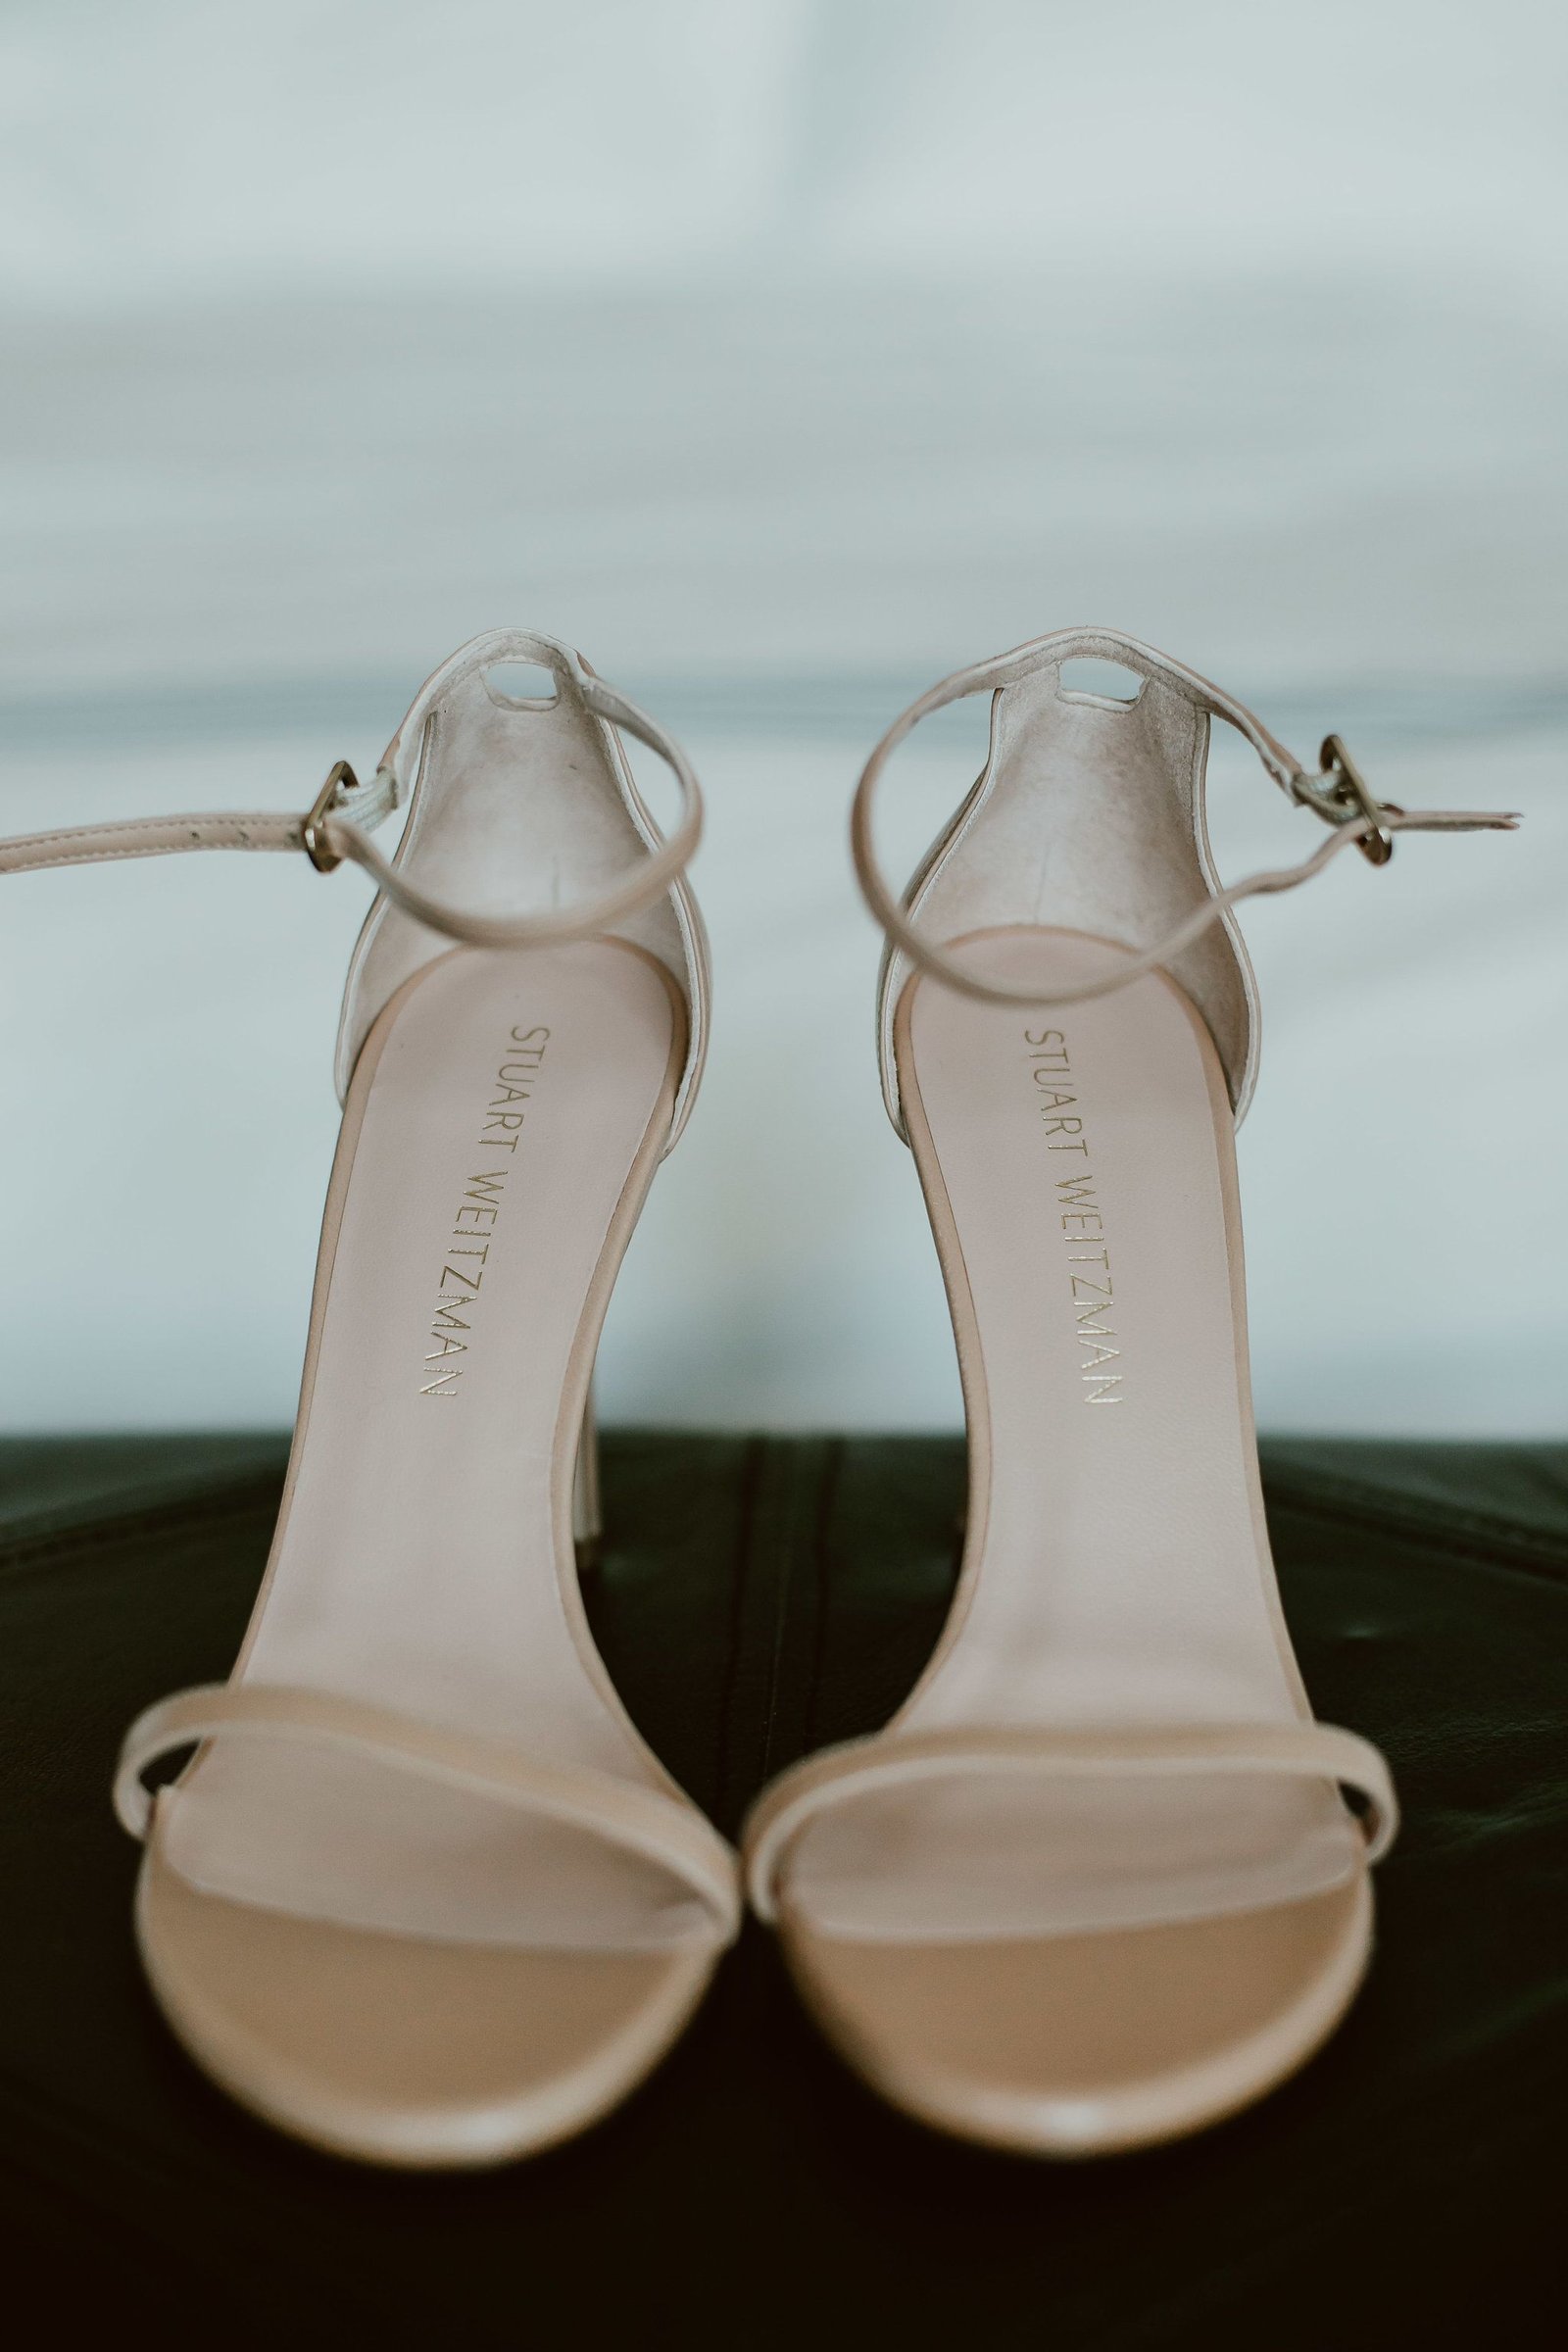 Stuart Weitzman Shoes for Wedding Day at The Cape by Thompson Hotels in Los Cabos Mexico